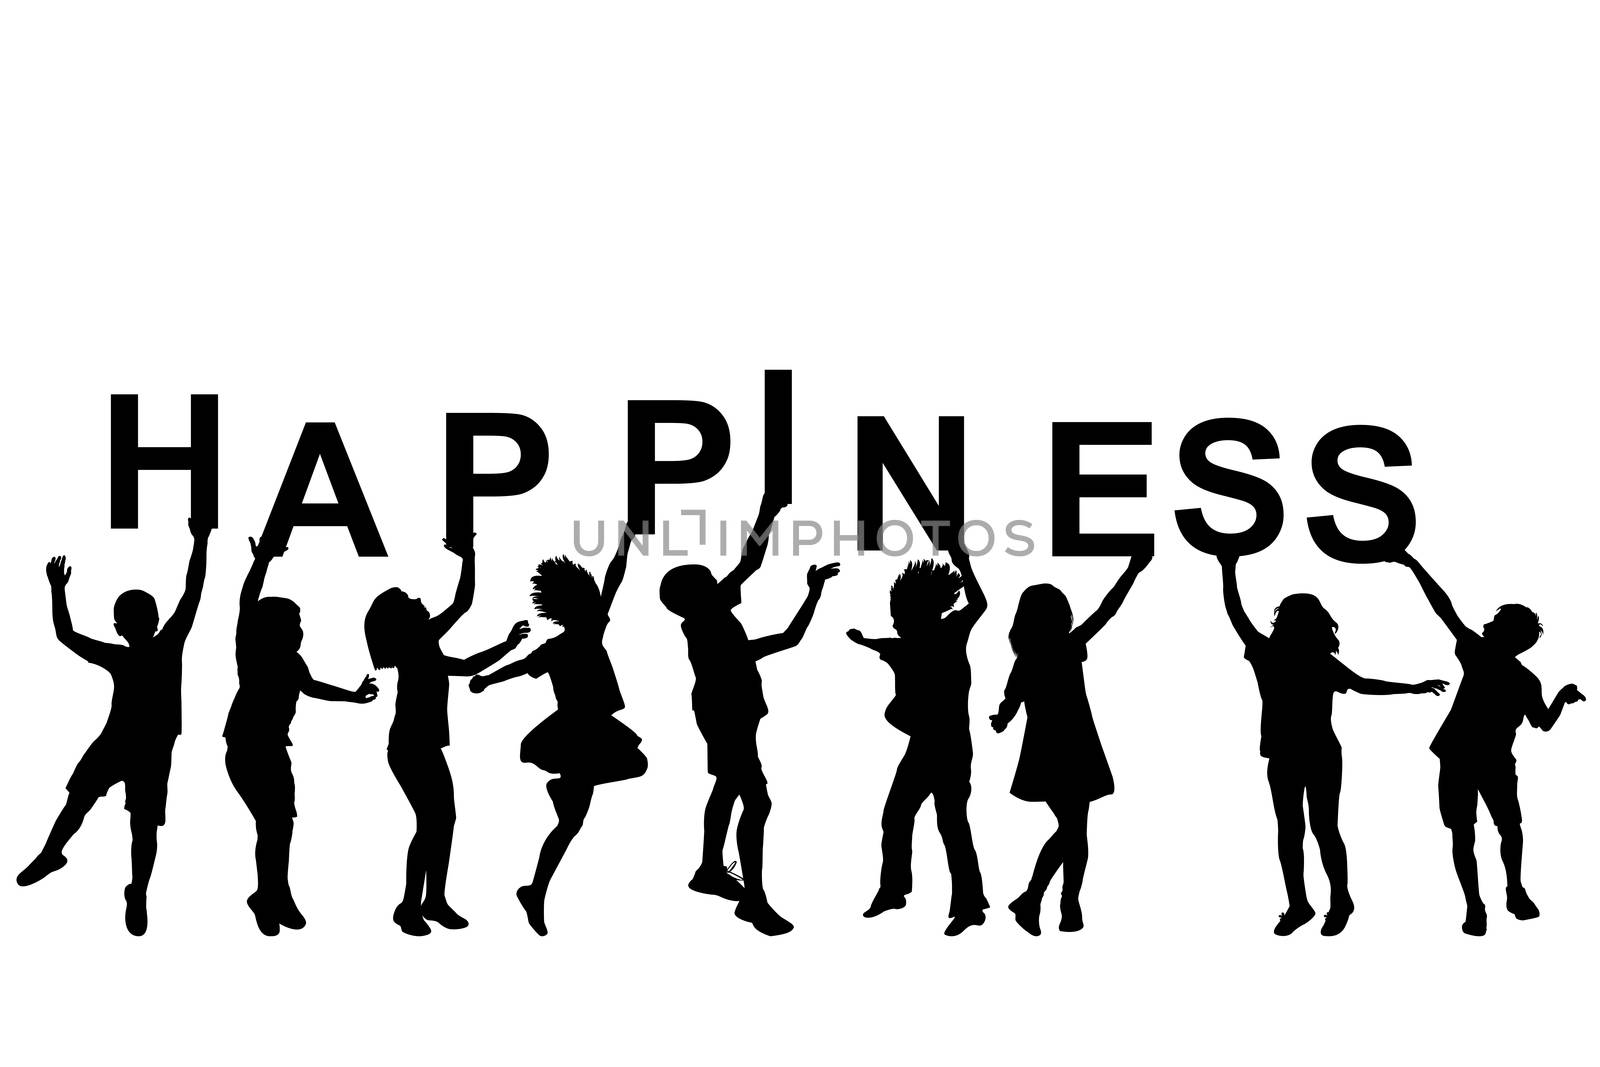 Kids silhouettes holding letters with word HAPPINESS by hibrida13